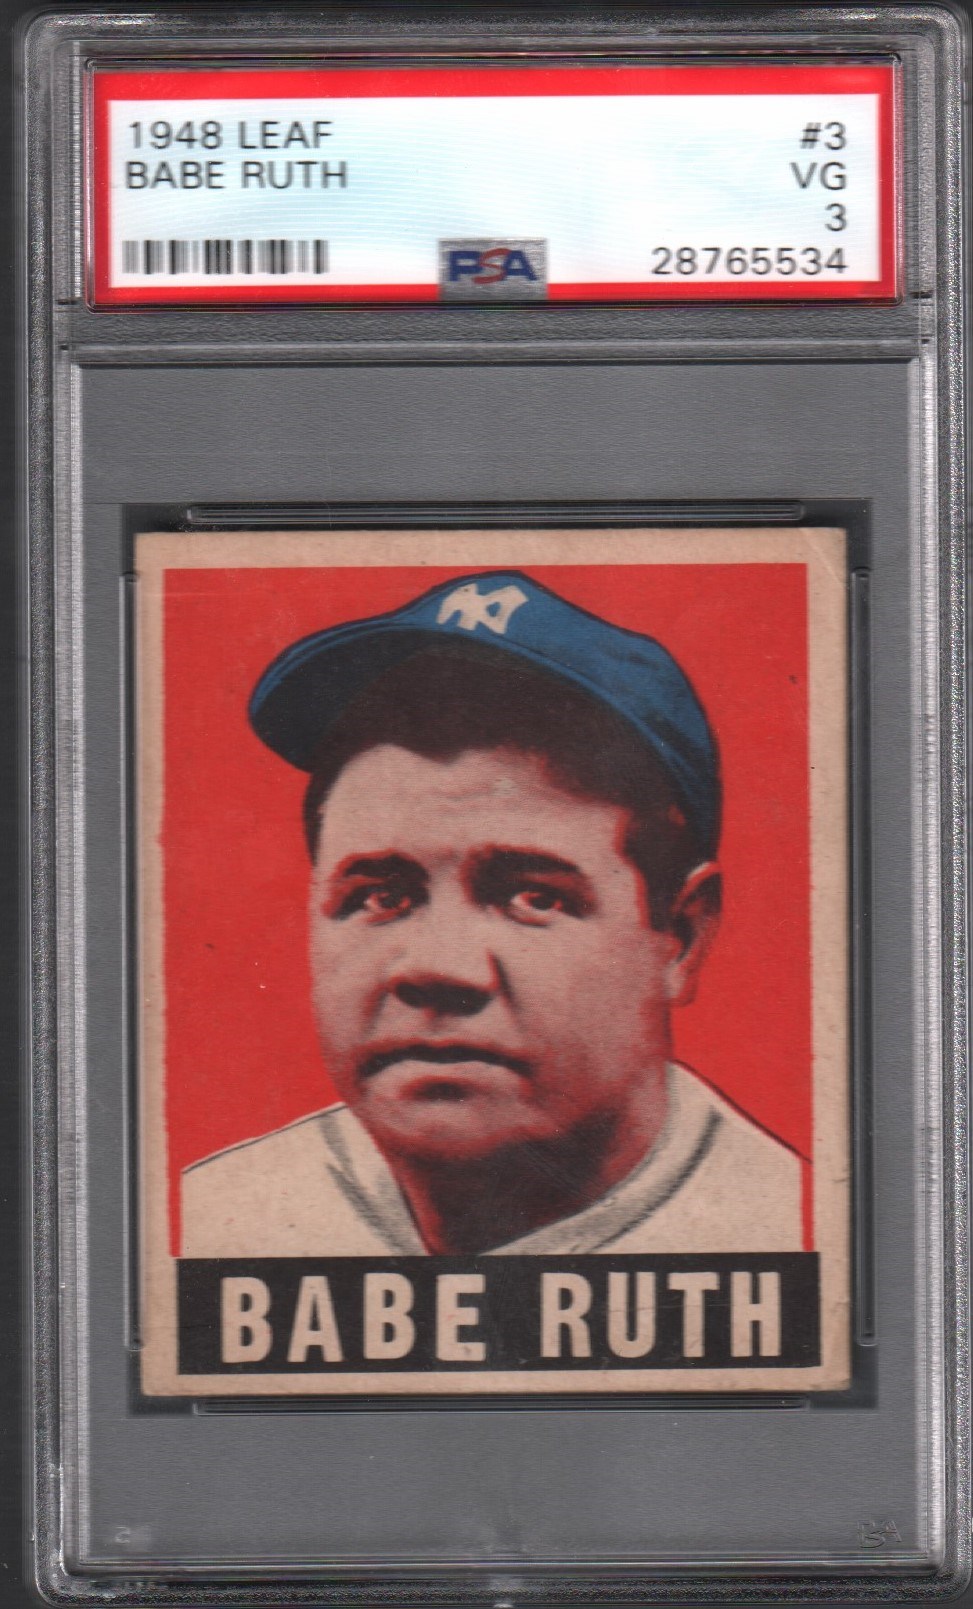 Baseball and Trading Cards - 1948 Leaf #3 Babe Ruth - PSA VG 3